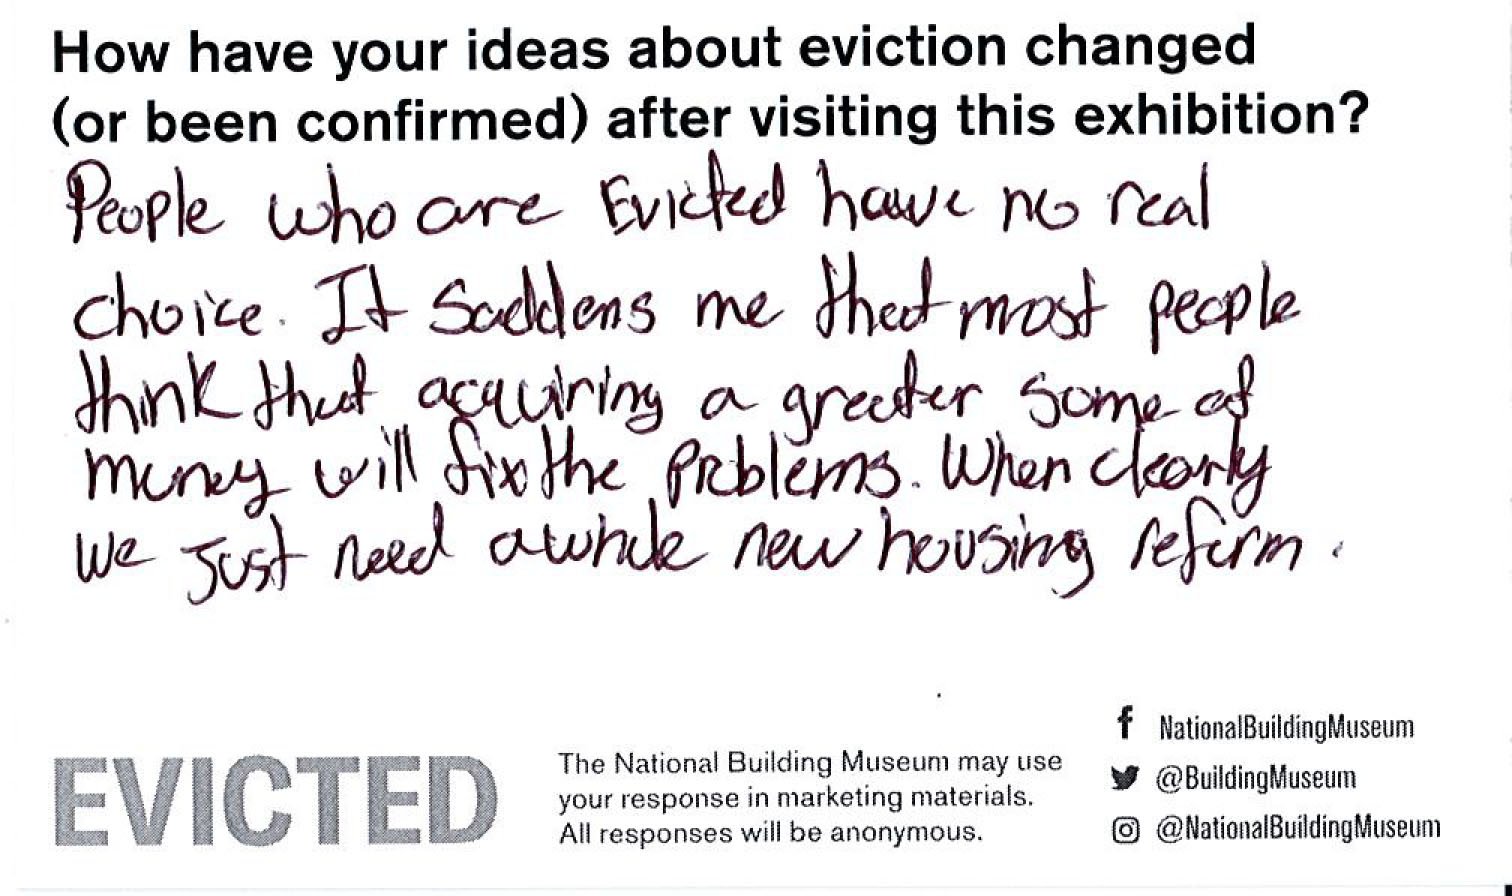 People who are evicted have no real choice. It saddens me that most people think that acquiring a greater sum of money will fix the problems. When clearly we just need a whole new housing reform.